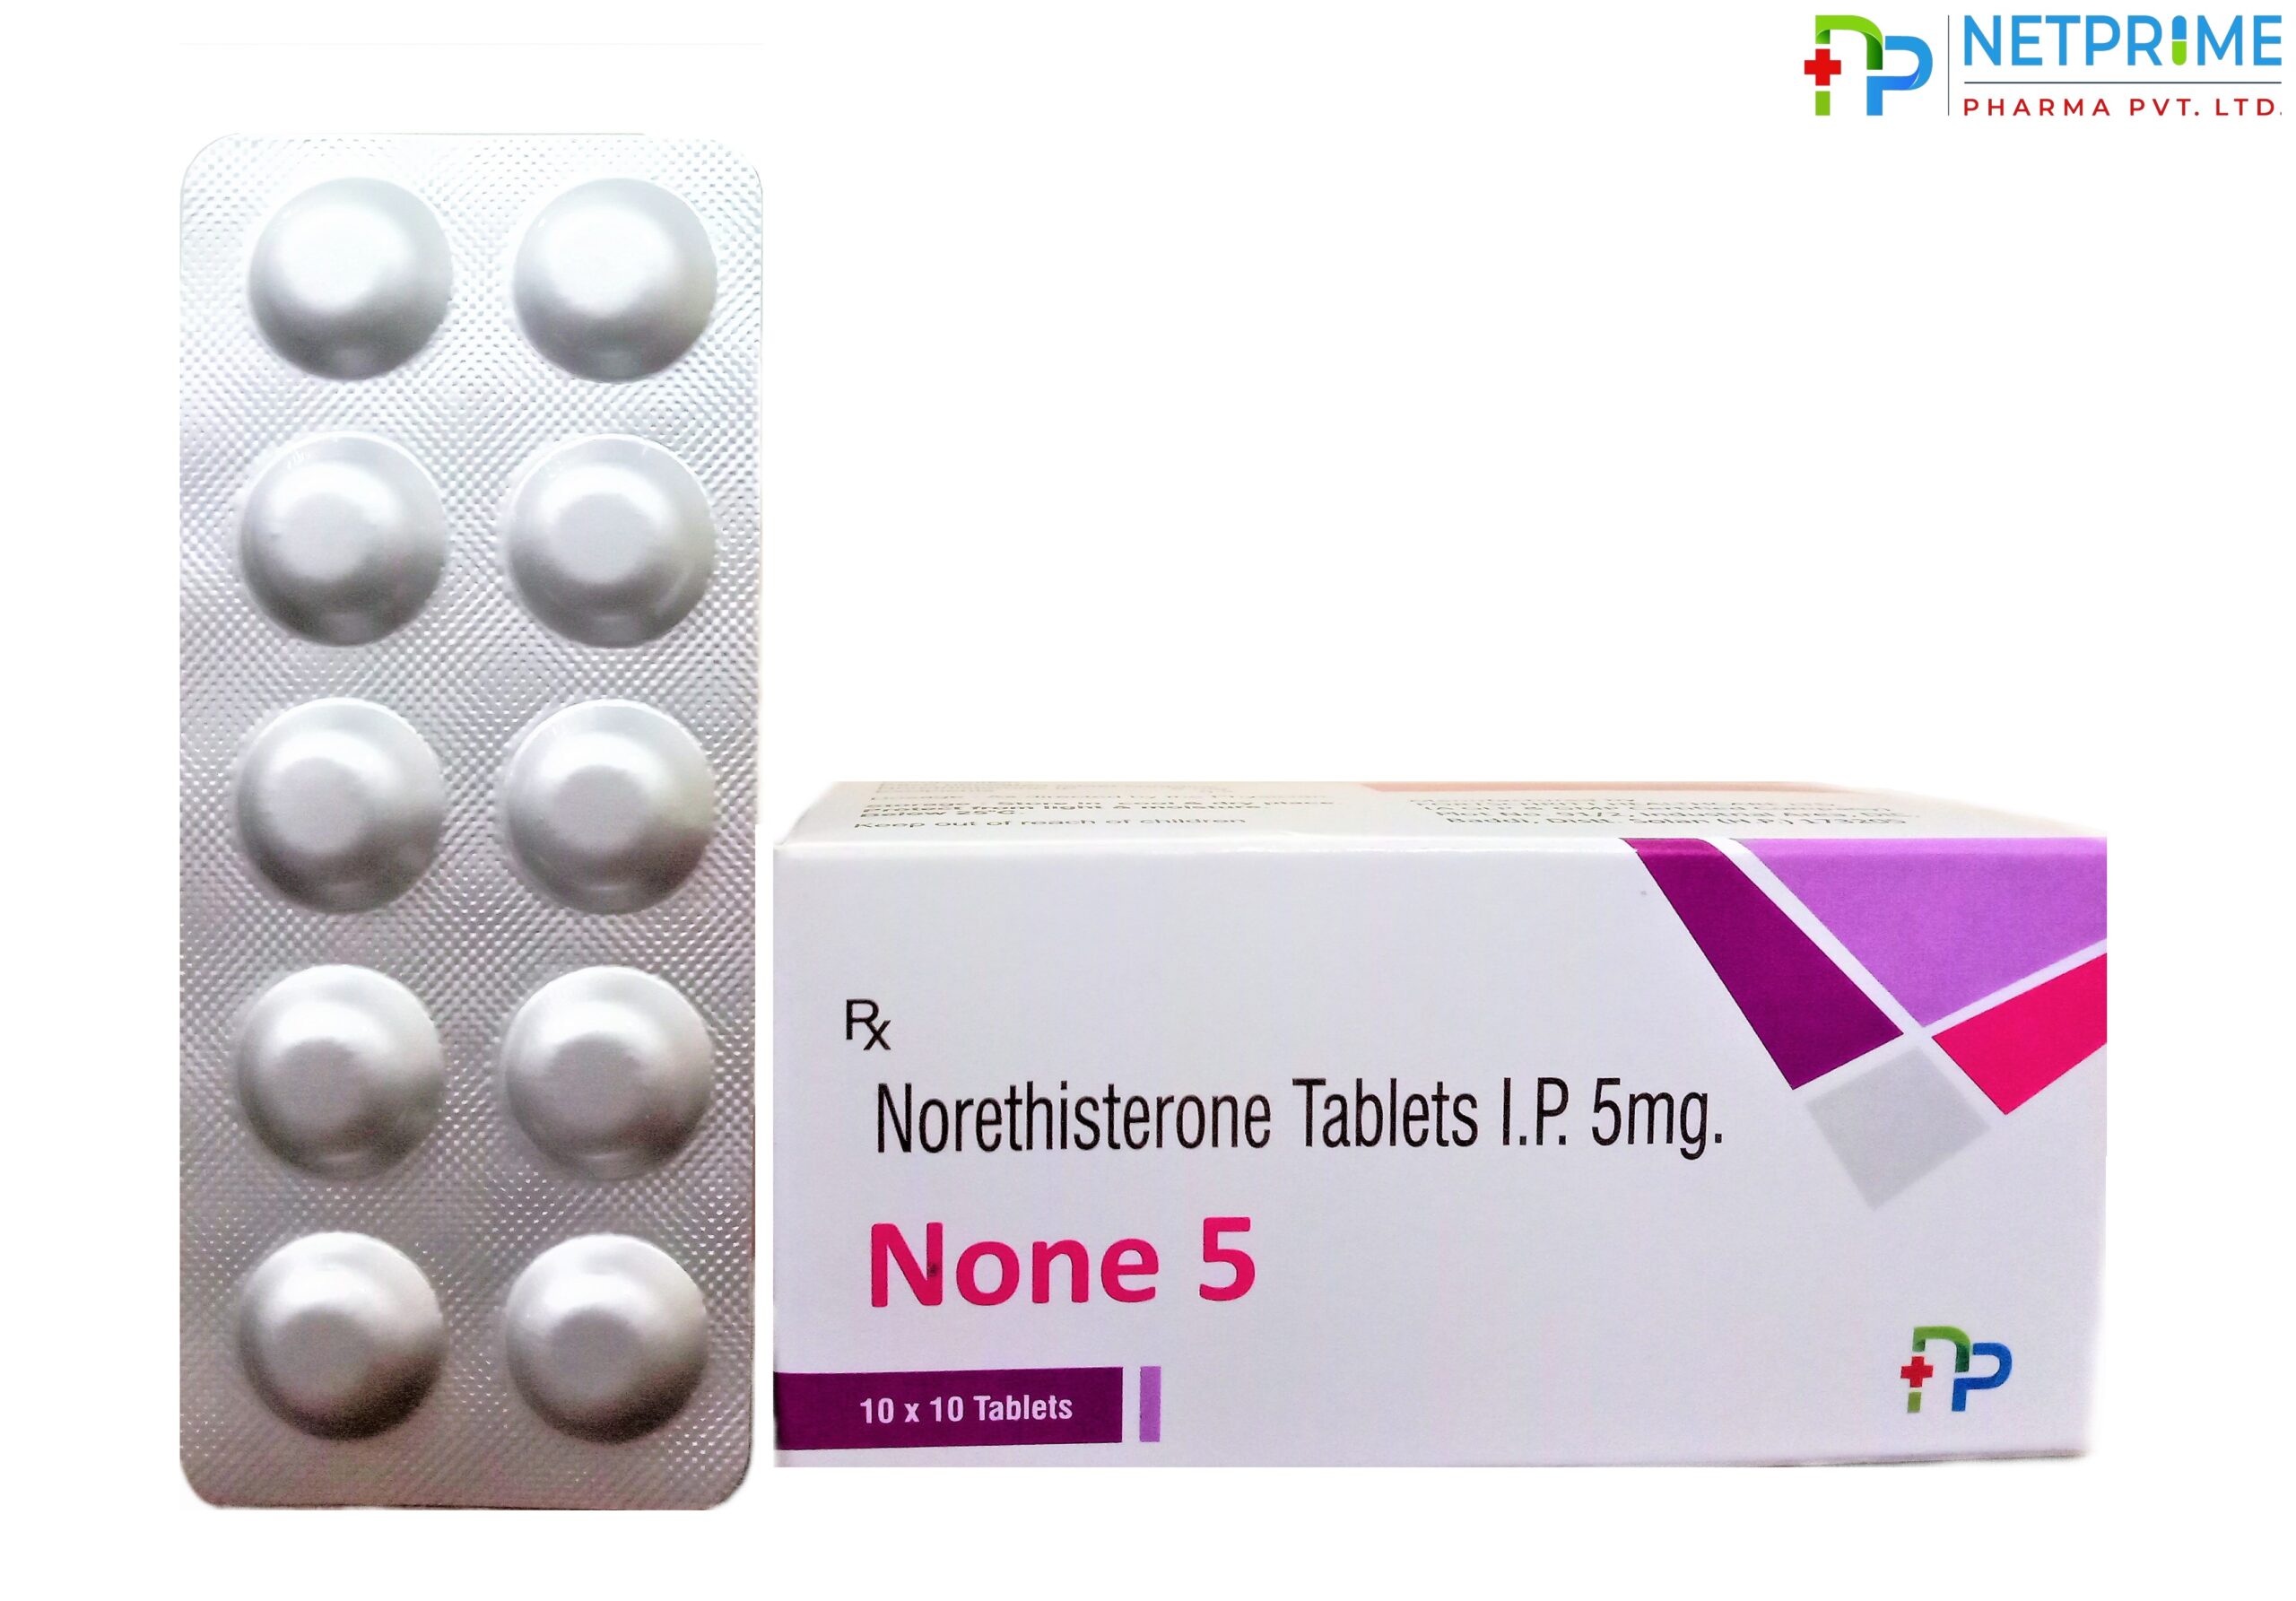 Norethisterone I.P. 5 mg Tablets